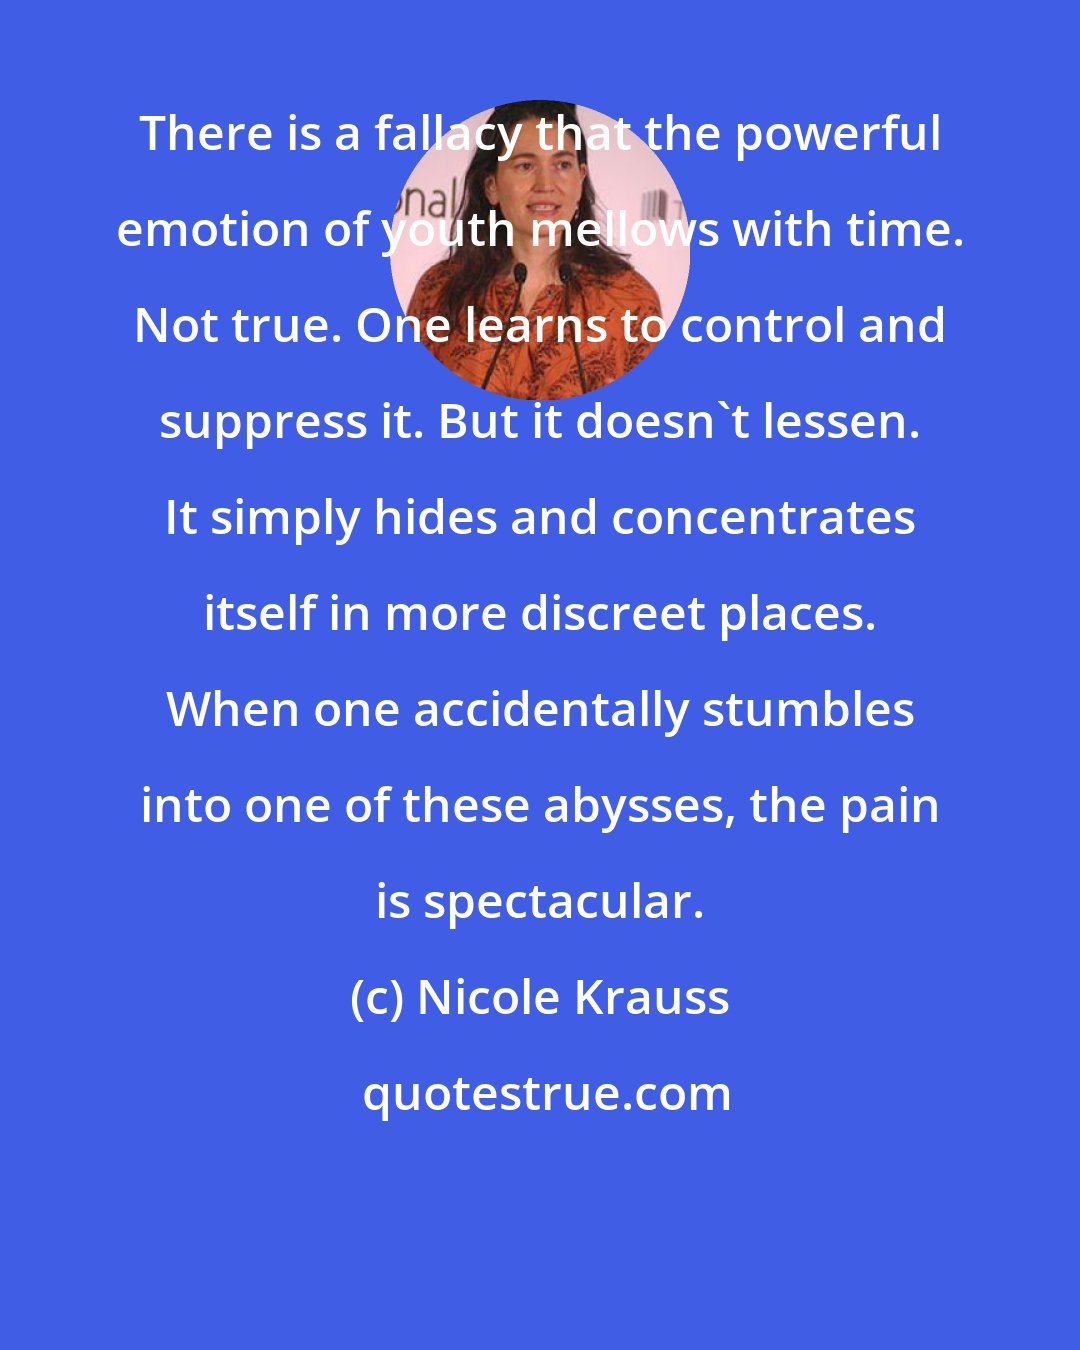 Nicole Krauss: There is a fallacy that the powerful emotion of youth mellows with time. Not true. One learns to control and suppress it. But it doesn't lessen. It simply hides and concentrates itself in more discreet places. When one accidentally stumbles into one of these abysses, the pain is spectacular.